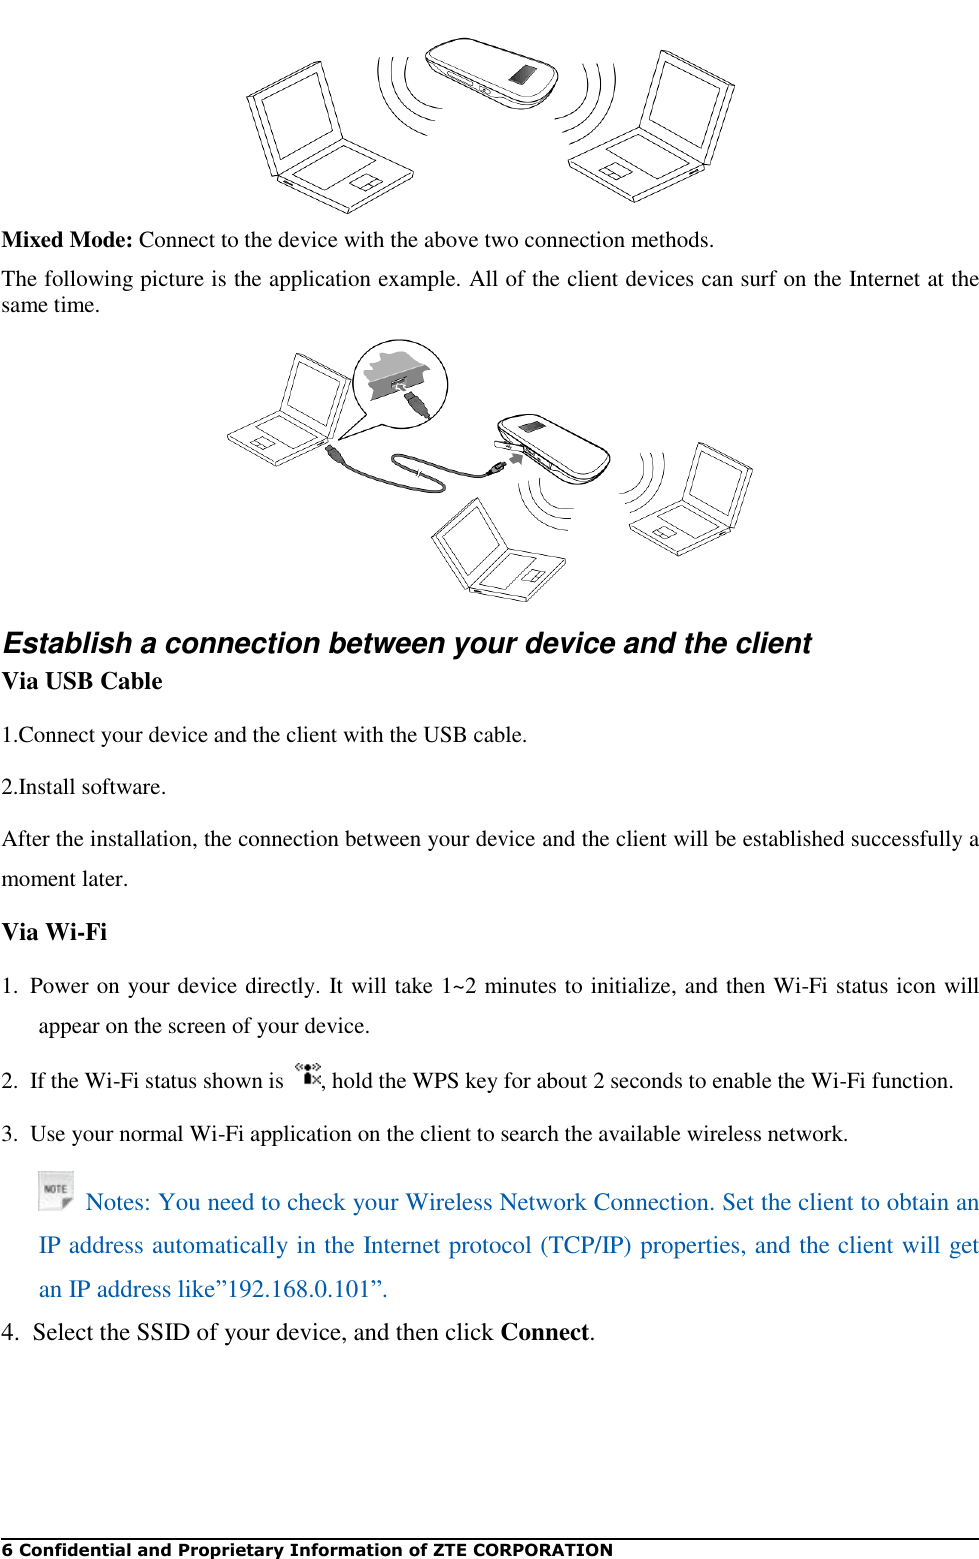   6 Confidential and Proprietary Information of ZTE CORPORATION  Mixed Mode: Connect to the device with the above two connection methods. The following picture is the application example. All of the client devices can surf on the Internet at the same time.  Establish a connection between your device and the client Via USB Cable 1.Connect your device and the client with the USB cable. 2.Install software. After the installation, the connection between your device and the client will be established successfully a moment later. Via Wi-Fi 1.  Power on your device directly. It will take 1~2 minutes to initialize, and then Wi-Fi status icon will appear on the screen of your device. 2.  If the Wi-Fi status shown is  , hold the WPS key for about 2 seconds to enable the Wi-Fi function. 3.  Use your normal Wi-Fi application on the client to search the available wireless network.   Notes: You need to check your Wireless Network Connection. Set the client to obtain an IP address automatically in the Internet protocol (TCP/IP) properties, and the client will get an IP address like”192.168.0.101”. 4.  Select the SSID of your device, and then click Connect. 